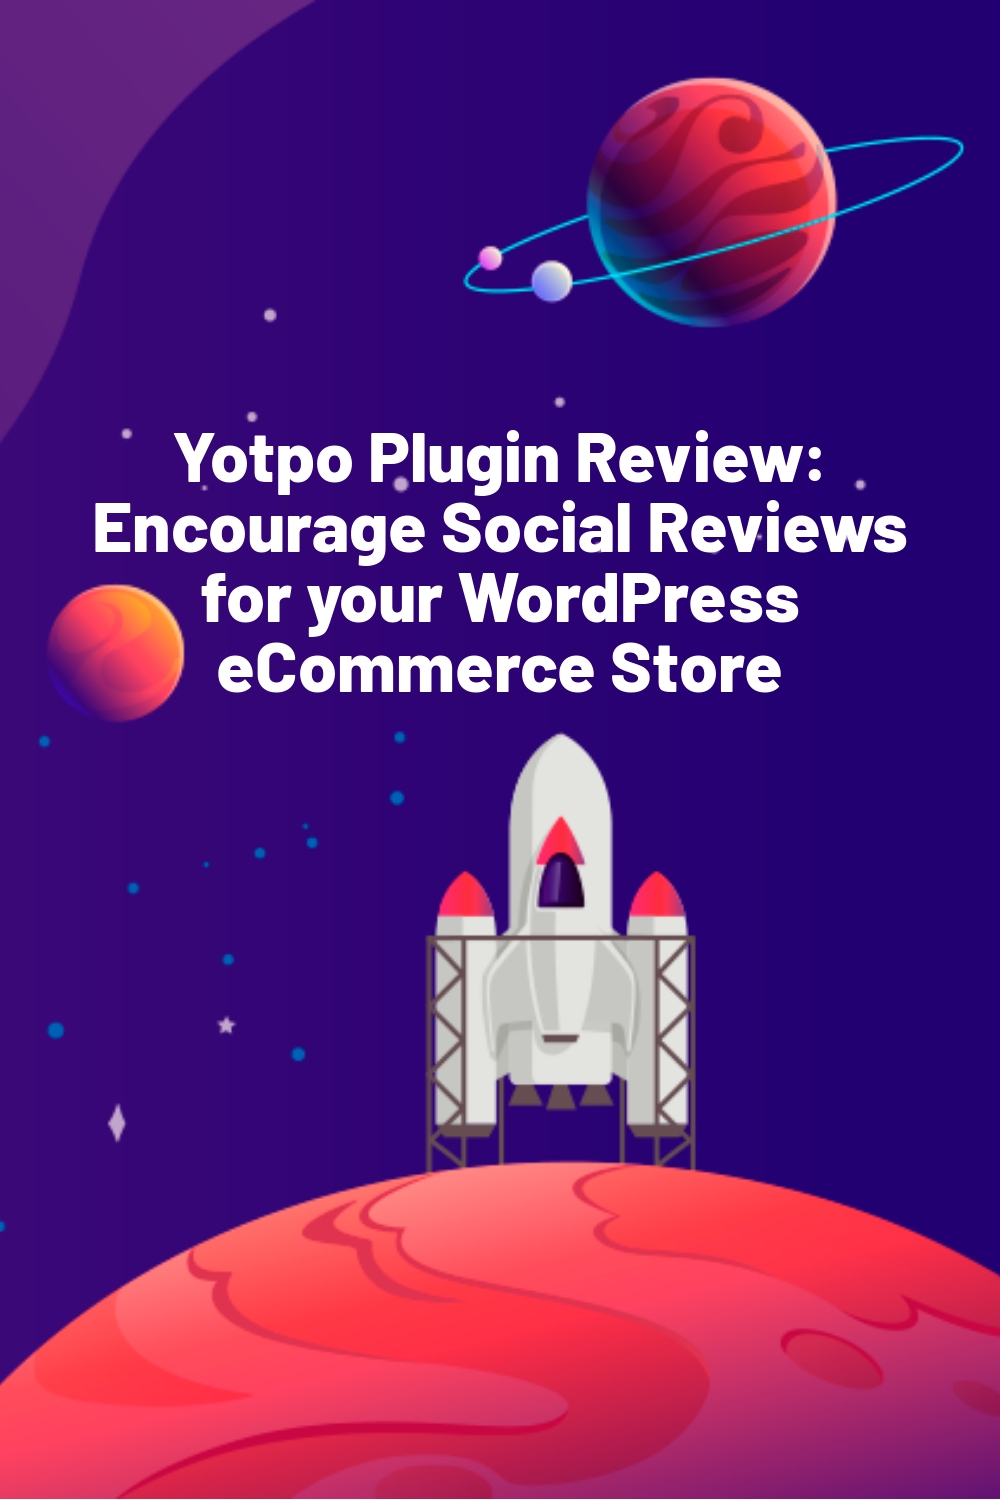 Yotpo Plugin Review: Encourage Social Reviews for your WordPress eCommerce Store